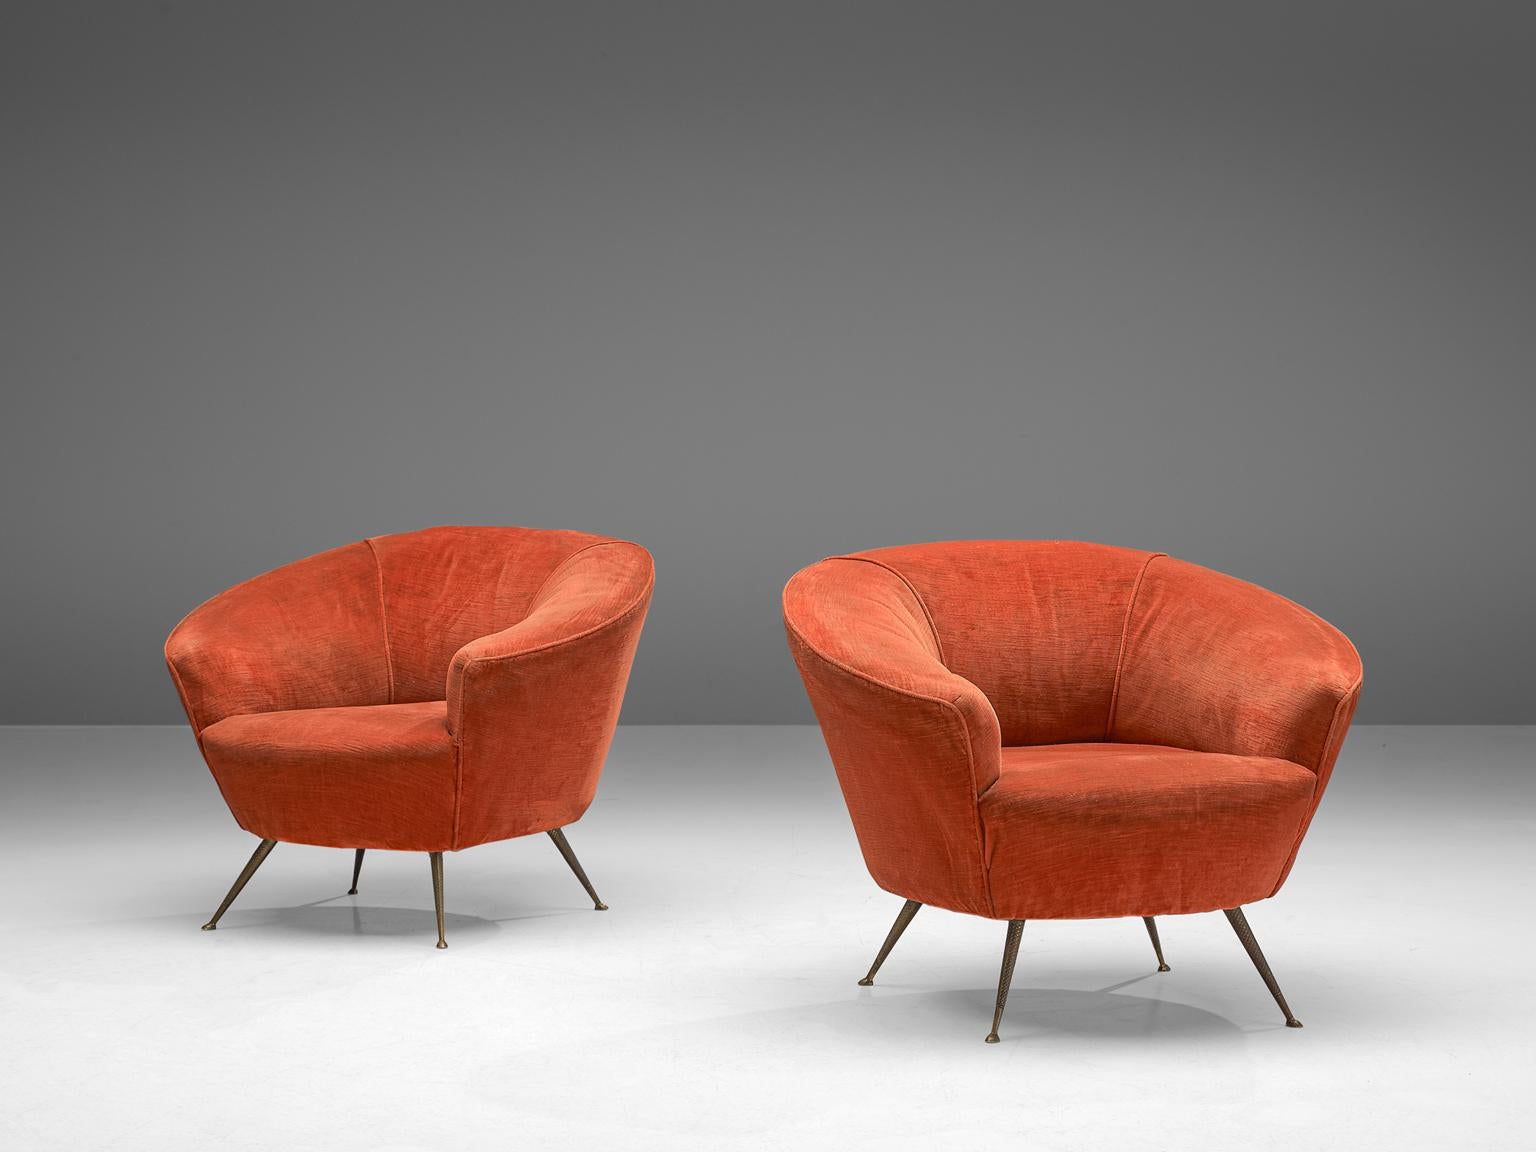 Pair of lounge chairs, velours and brass, Italy, 1960s.

Elegant pair, of club chairs from Italy. This pair of curvy chairs feature a narrow seat and wider backrest. The combination of the shape of the seat with the tilted brass legs, the chairs